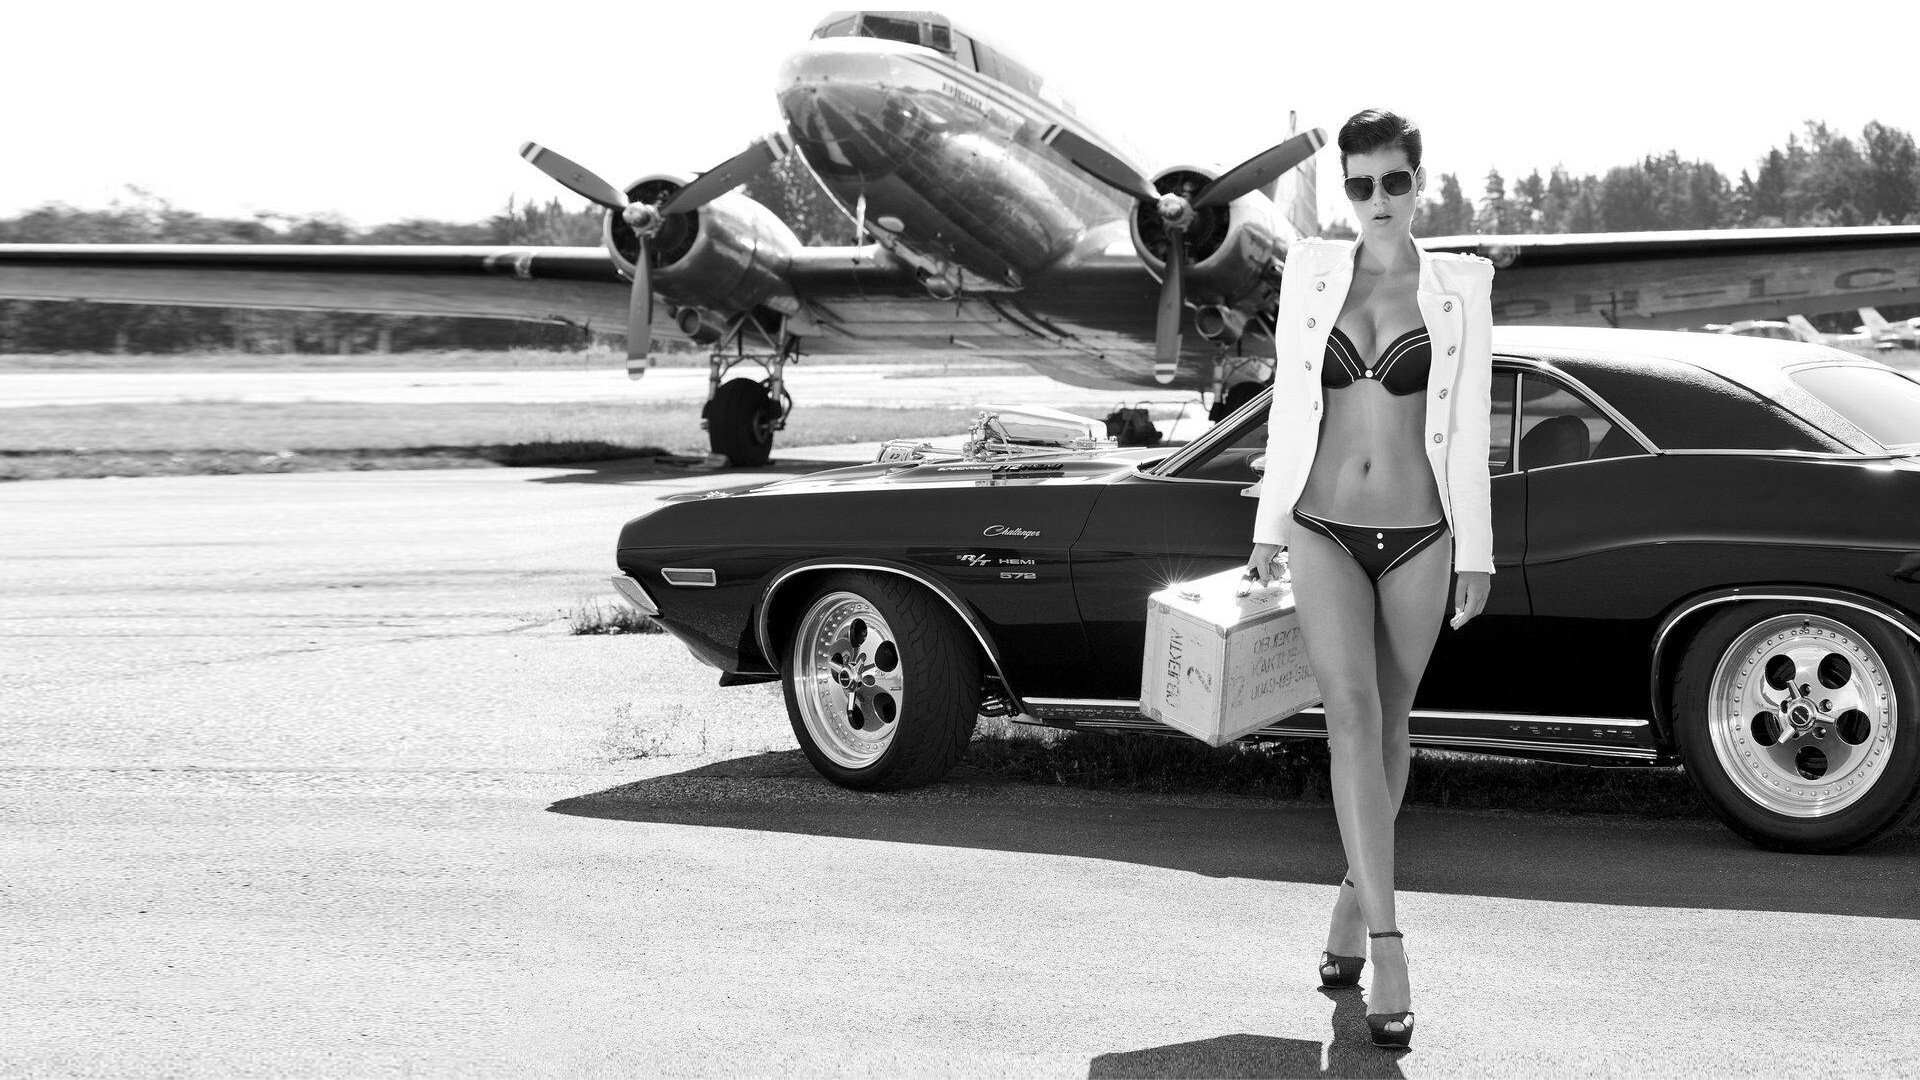 Girls and Muscle Cars: Black and white, Dodge Challenger R/T, Airplane, Airfield, Bikini. 1920x1080 Full HD Background.